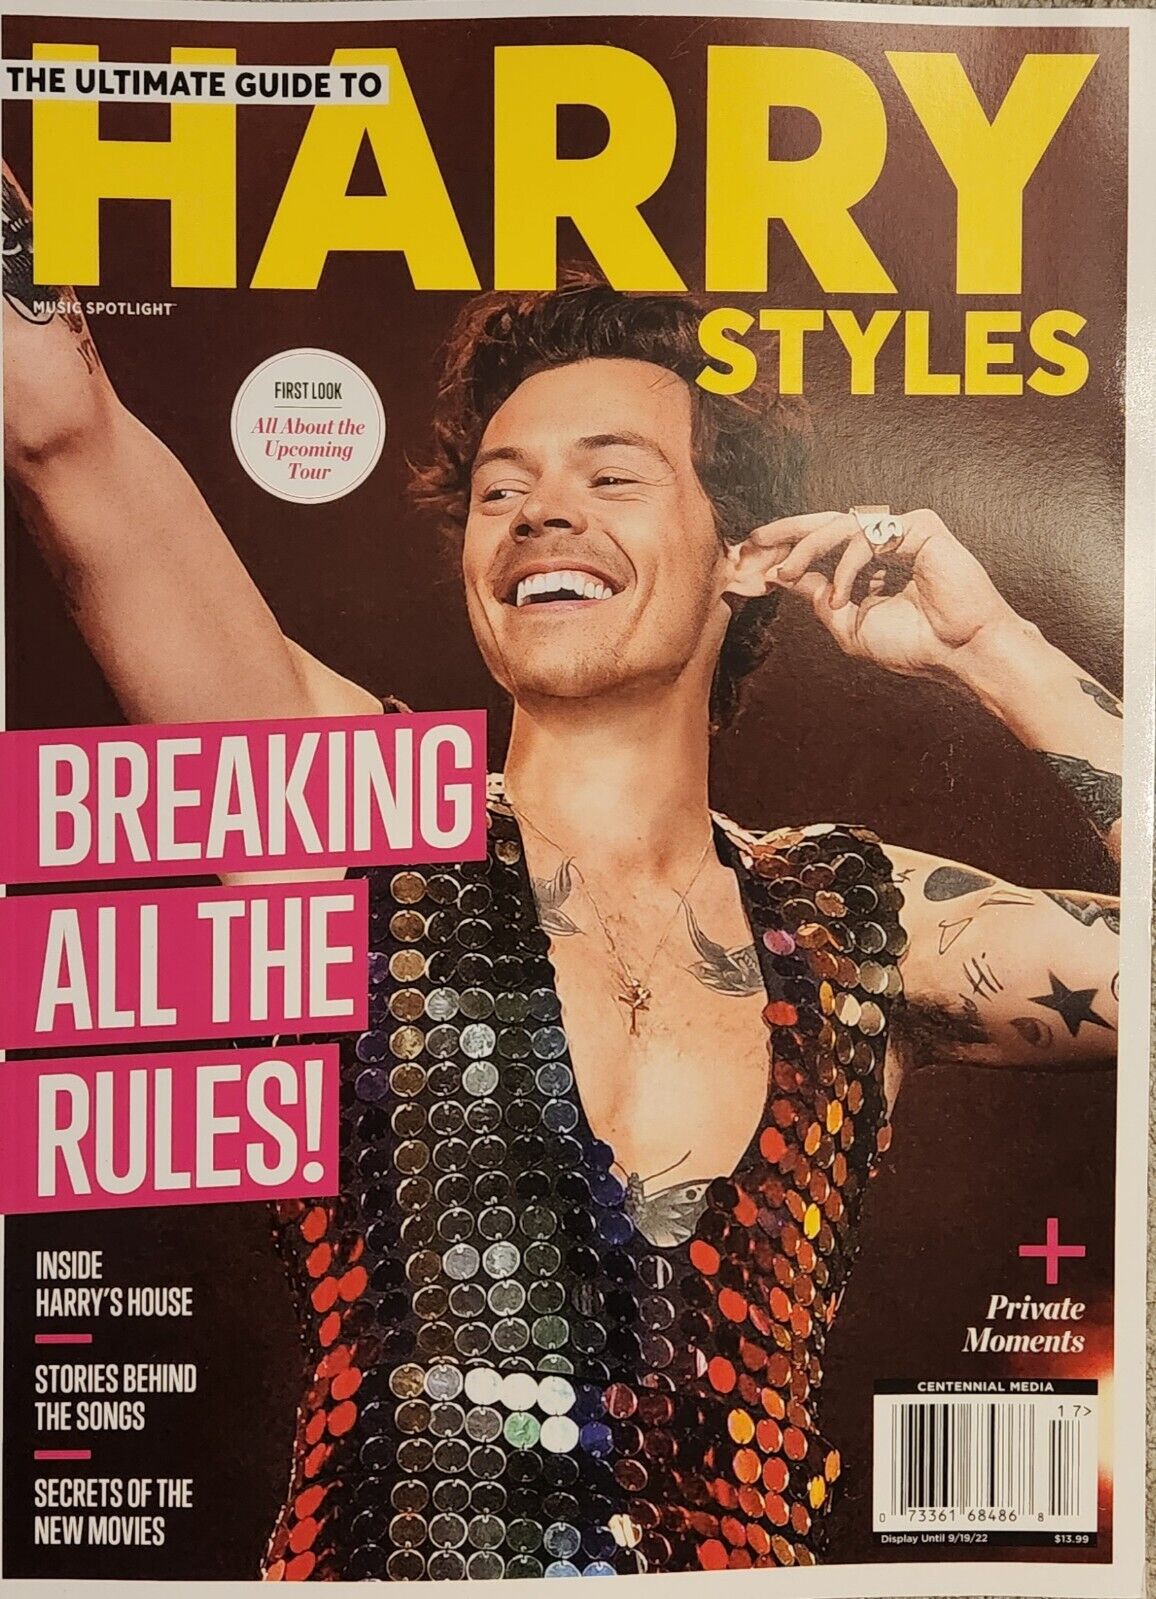 HARRY STYLES - THE ULTIMATE GUIDE SPECIAL MAGAZINE - BRAND NEW 2022